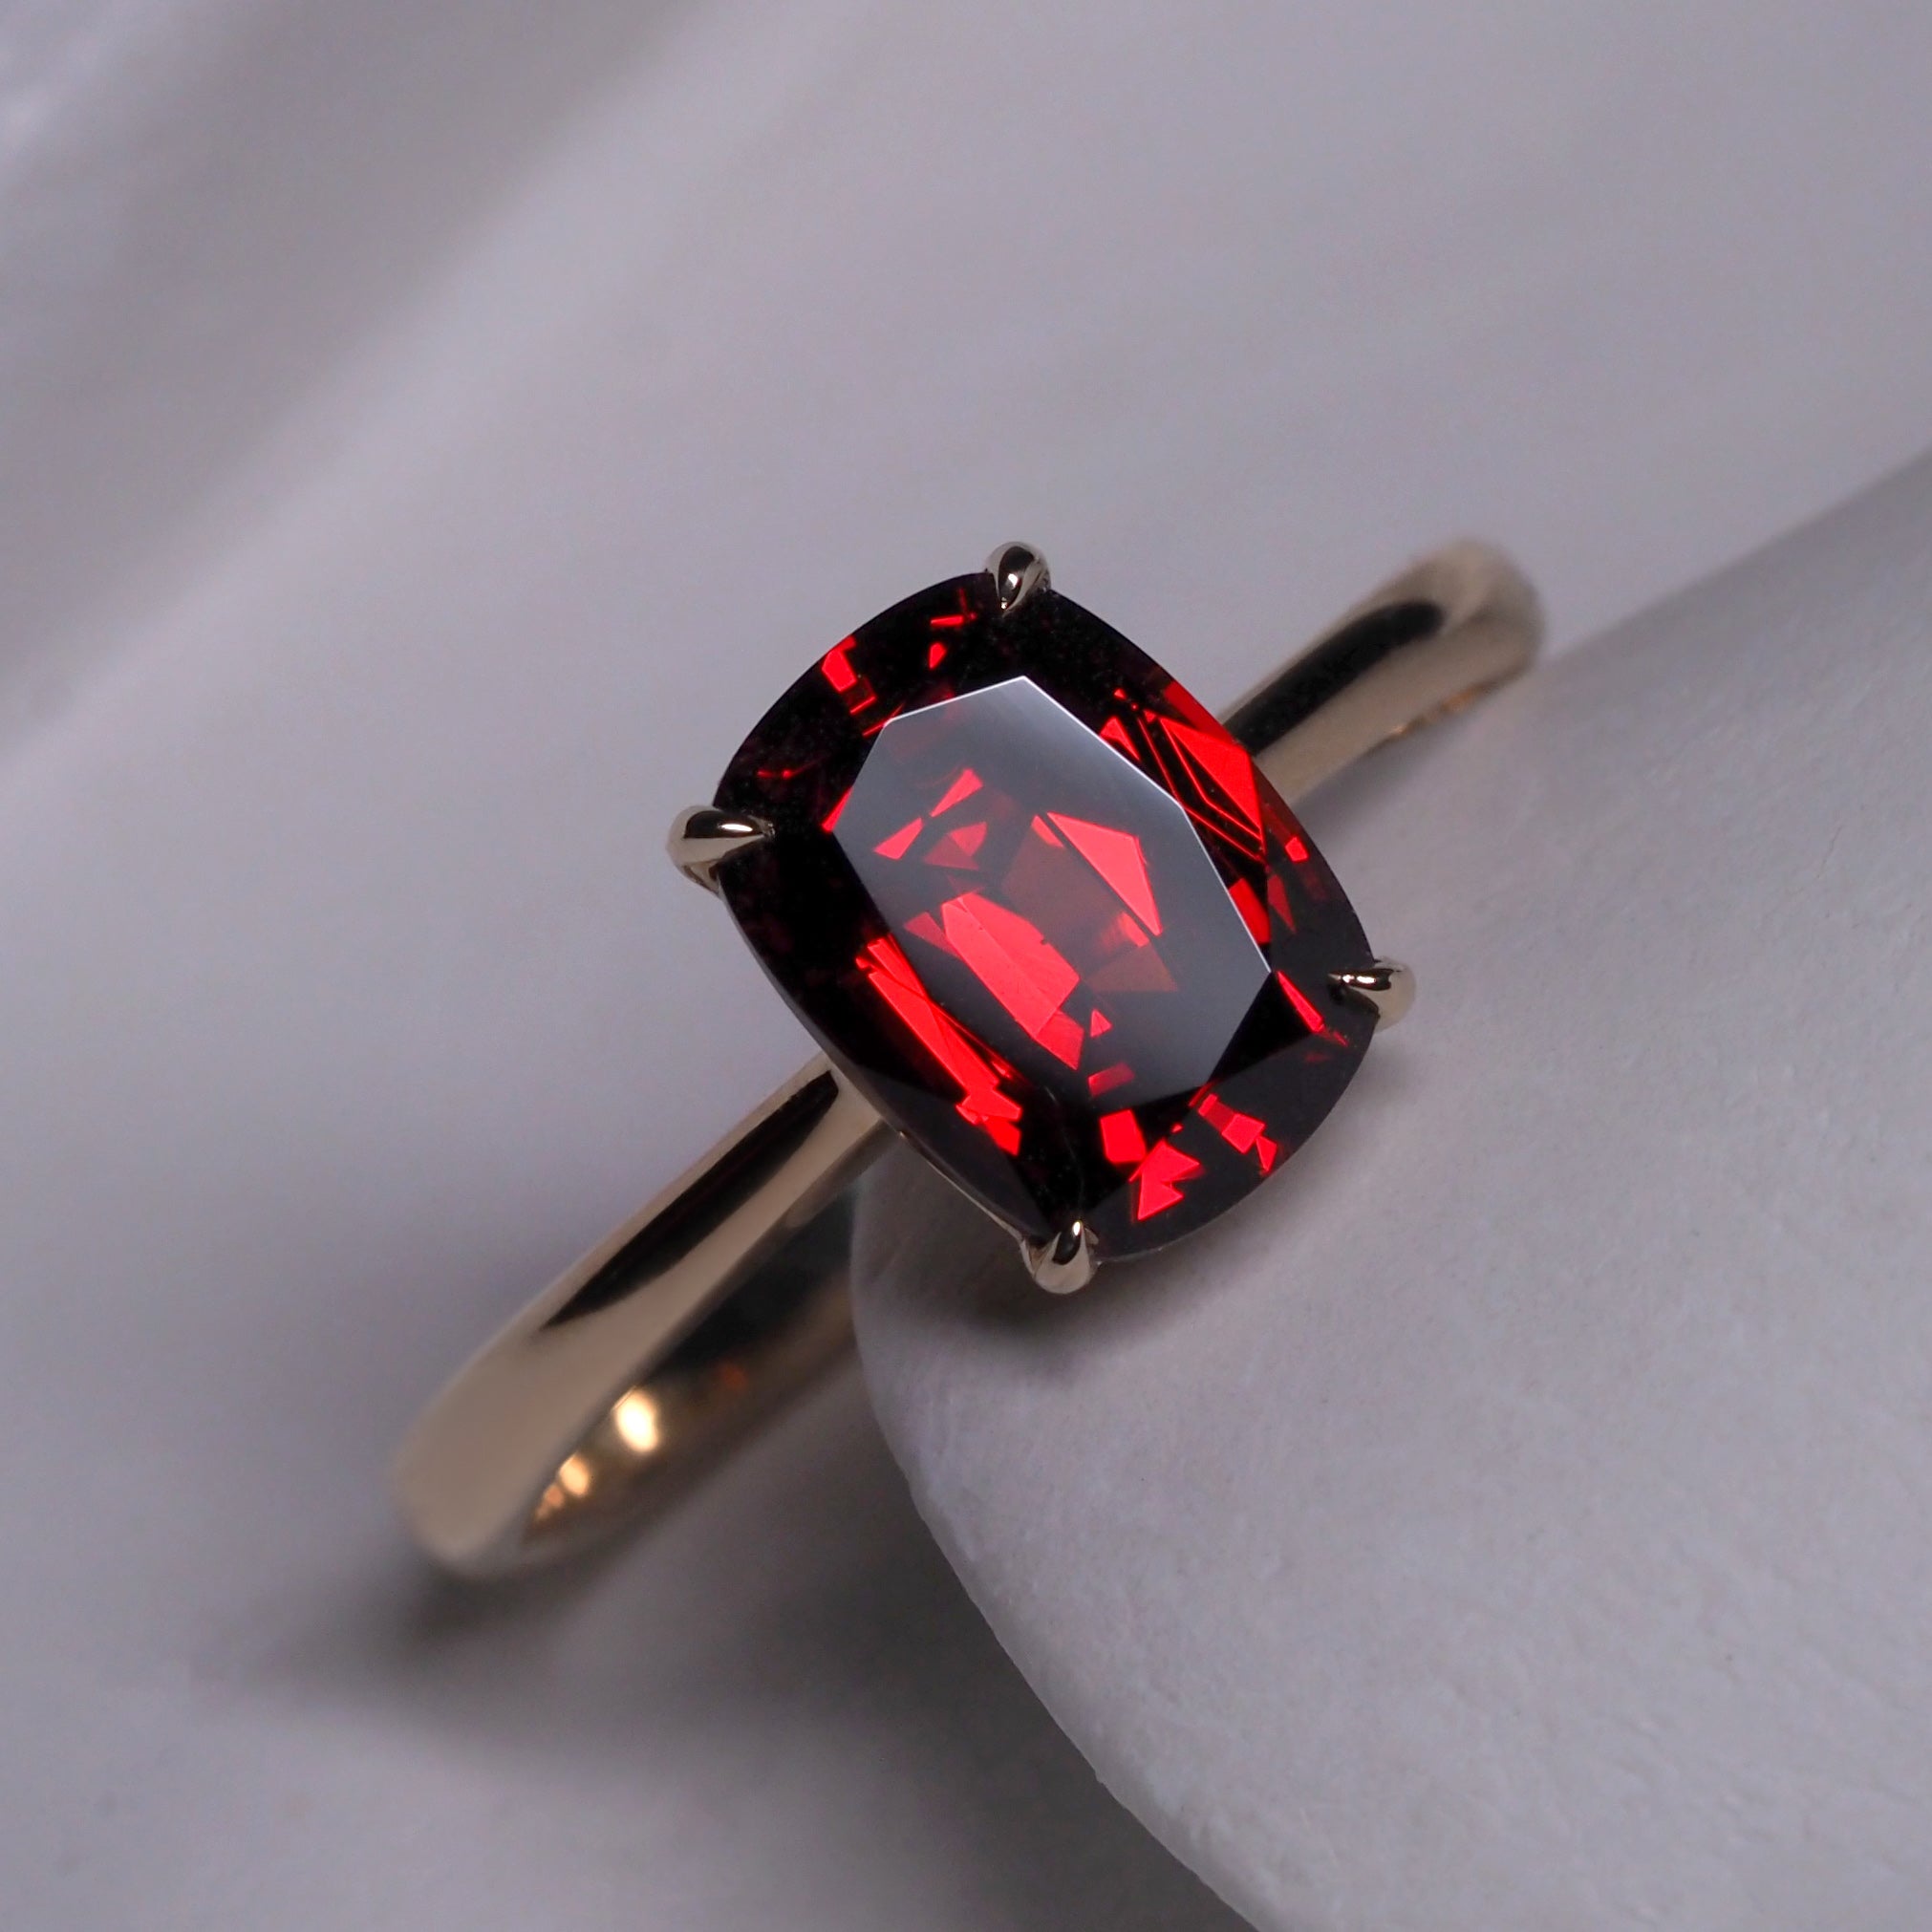 18K Yellow gold ring with natural almandine garnet
almandine origin - Tanzania
gemstone measurements - 8.94 х 6.65 х 4.47 mm
almandine weight - 2.7 carats
ring weight - 2.7 grams
ring size - 7.25 US (this ring may be resized, please contact us for